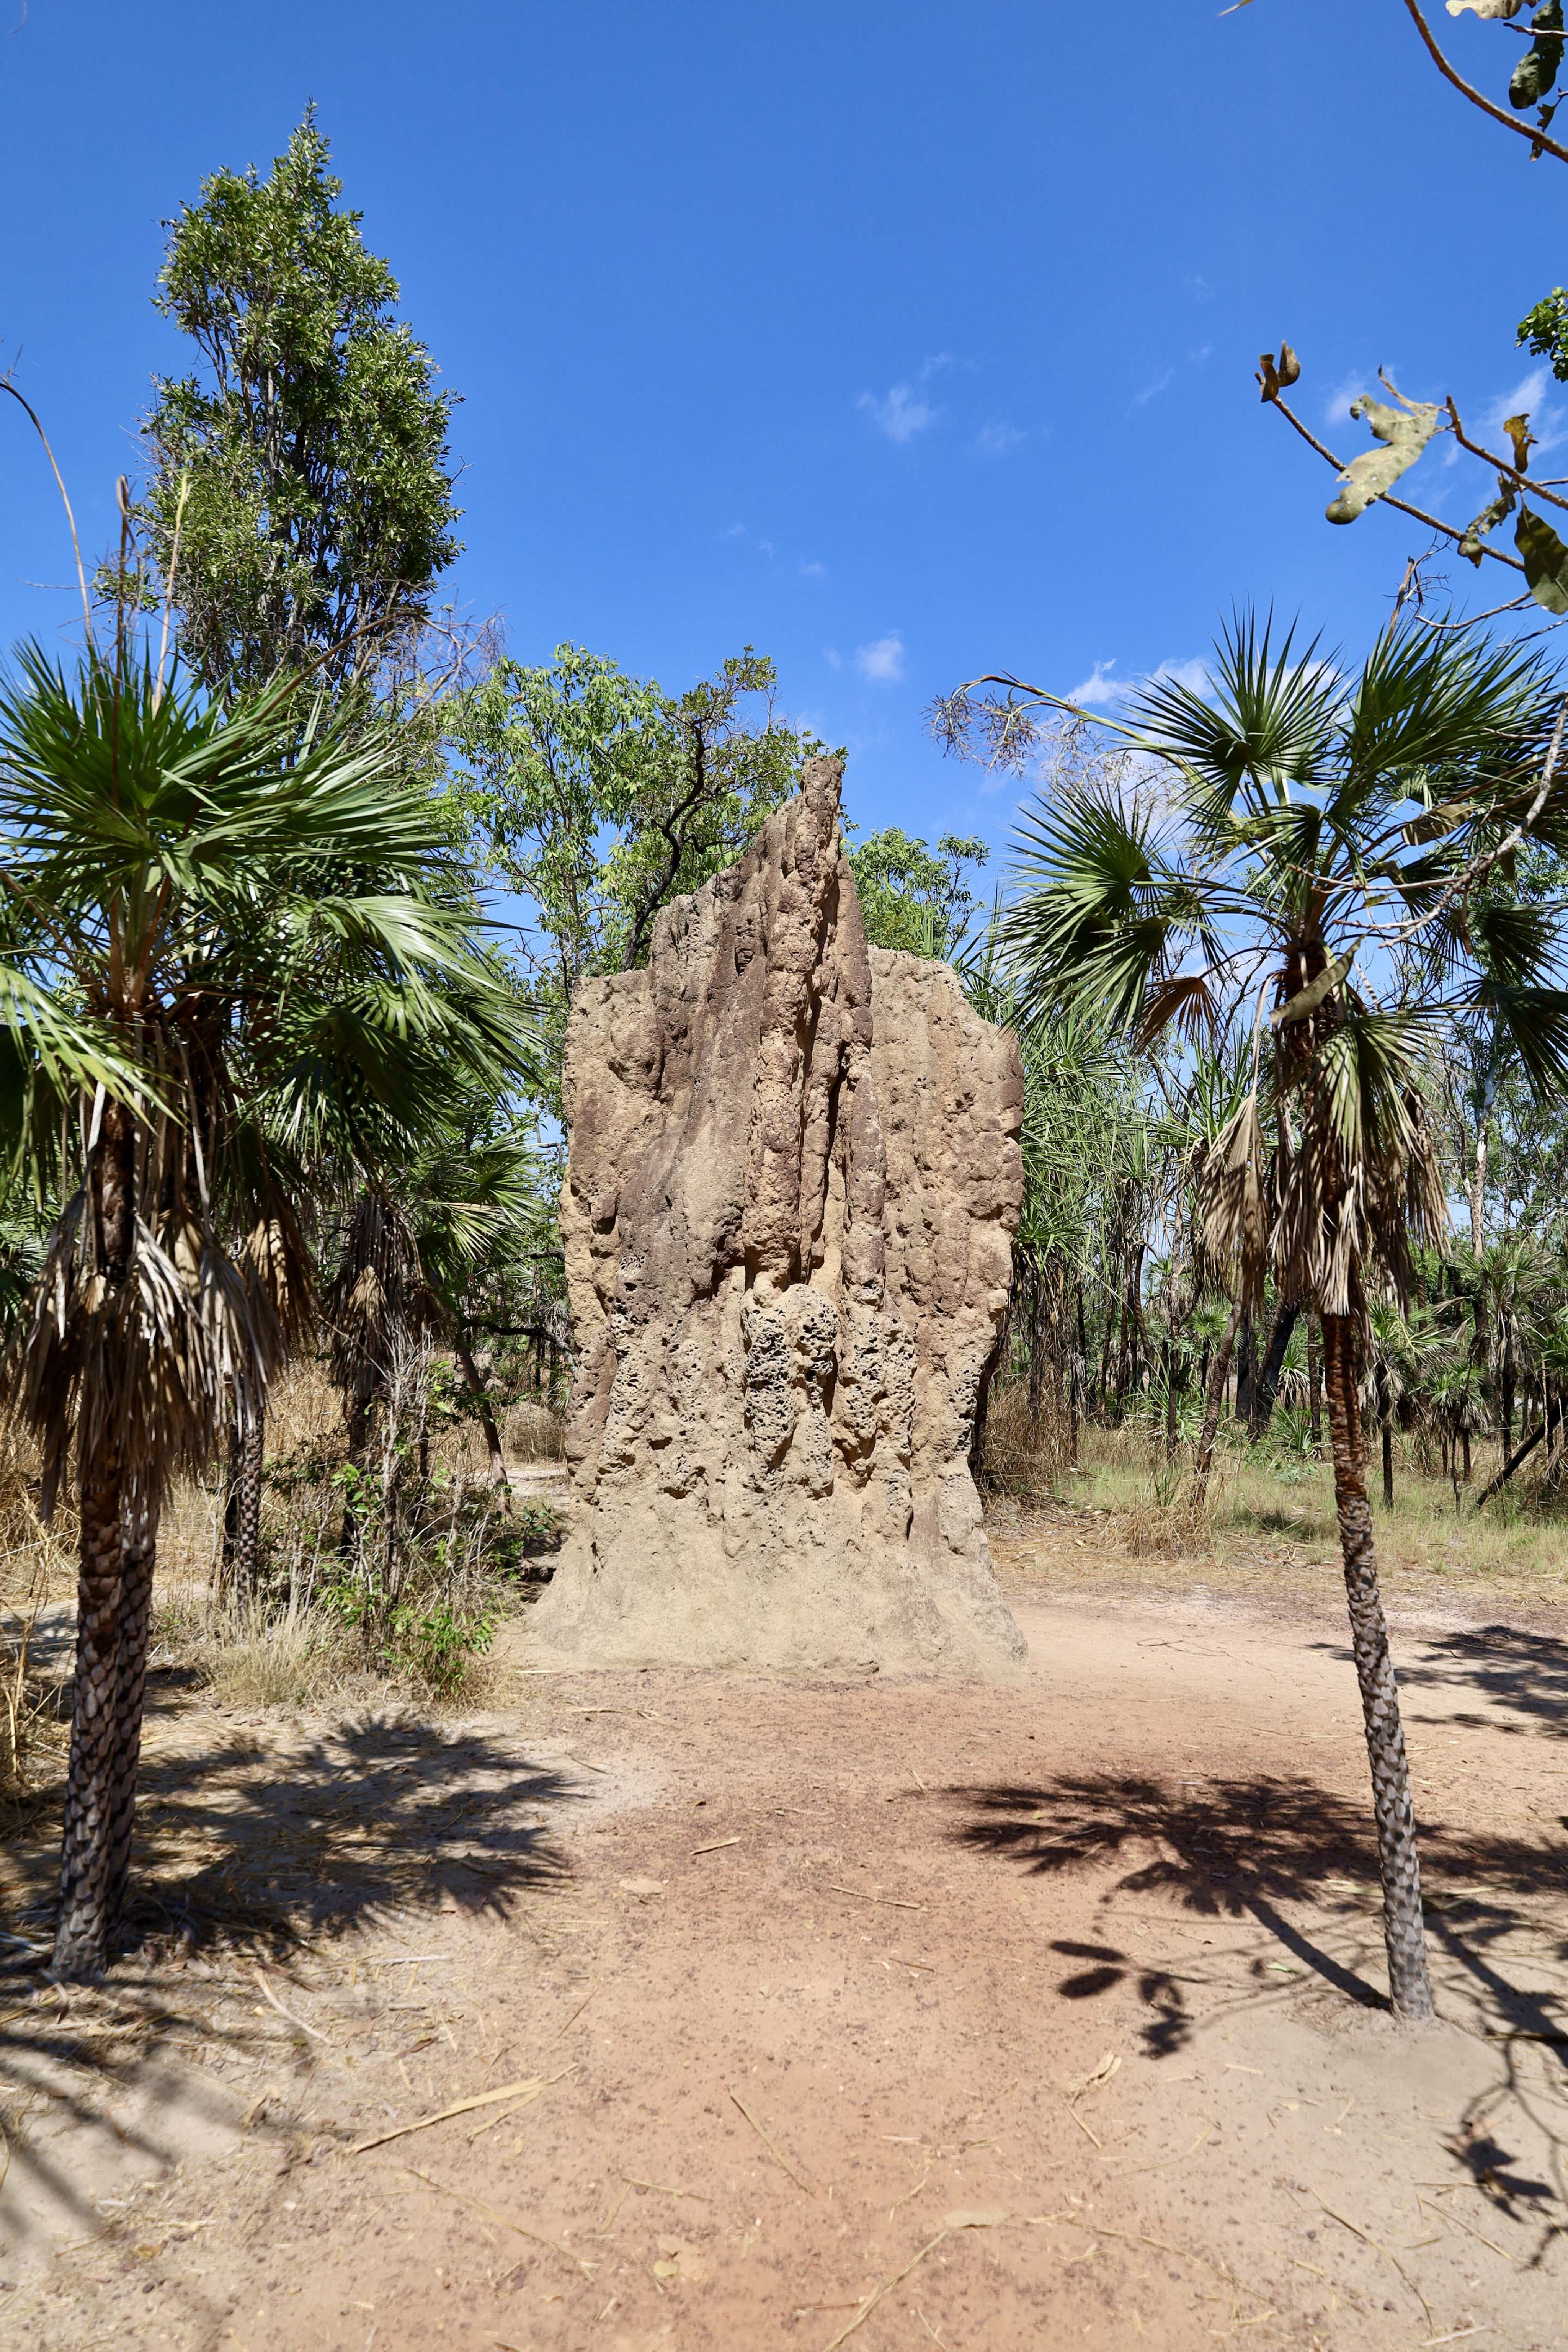 4a331b2d/cathedral termite mound litchfield national park jpg